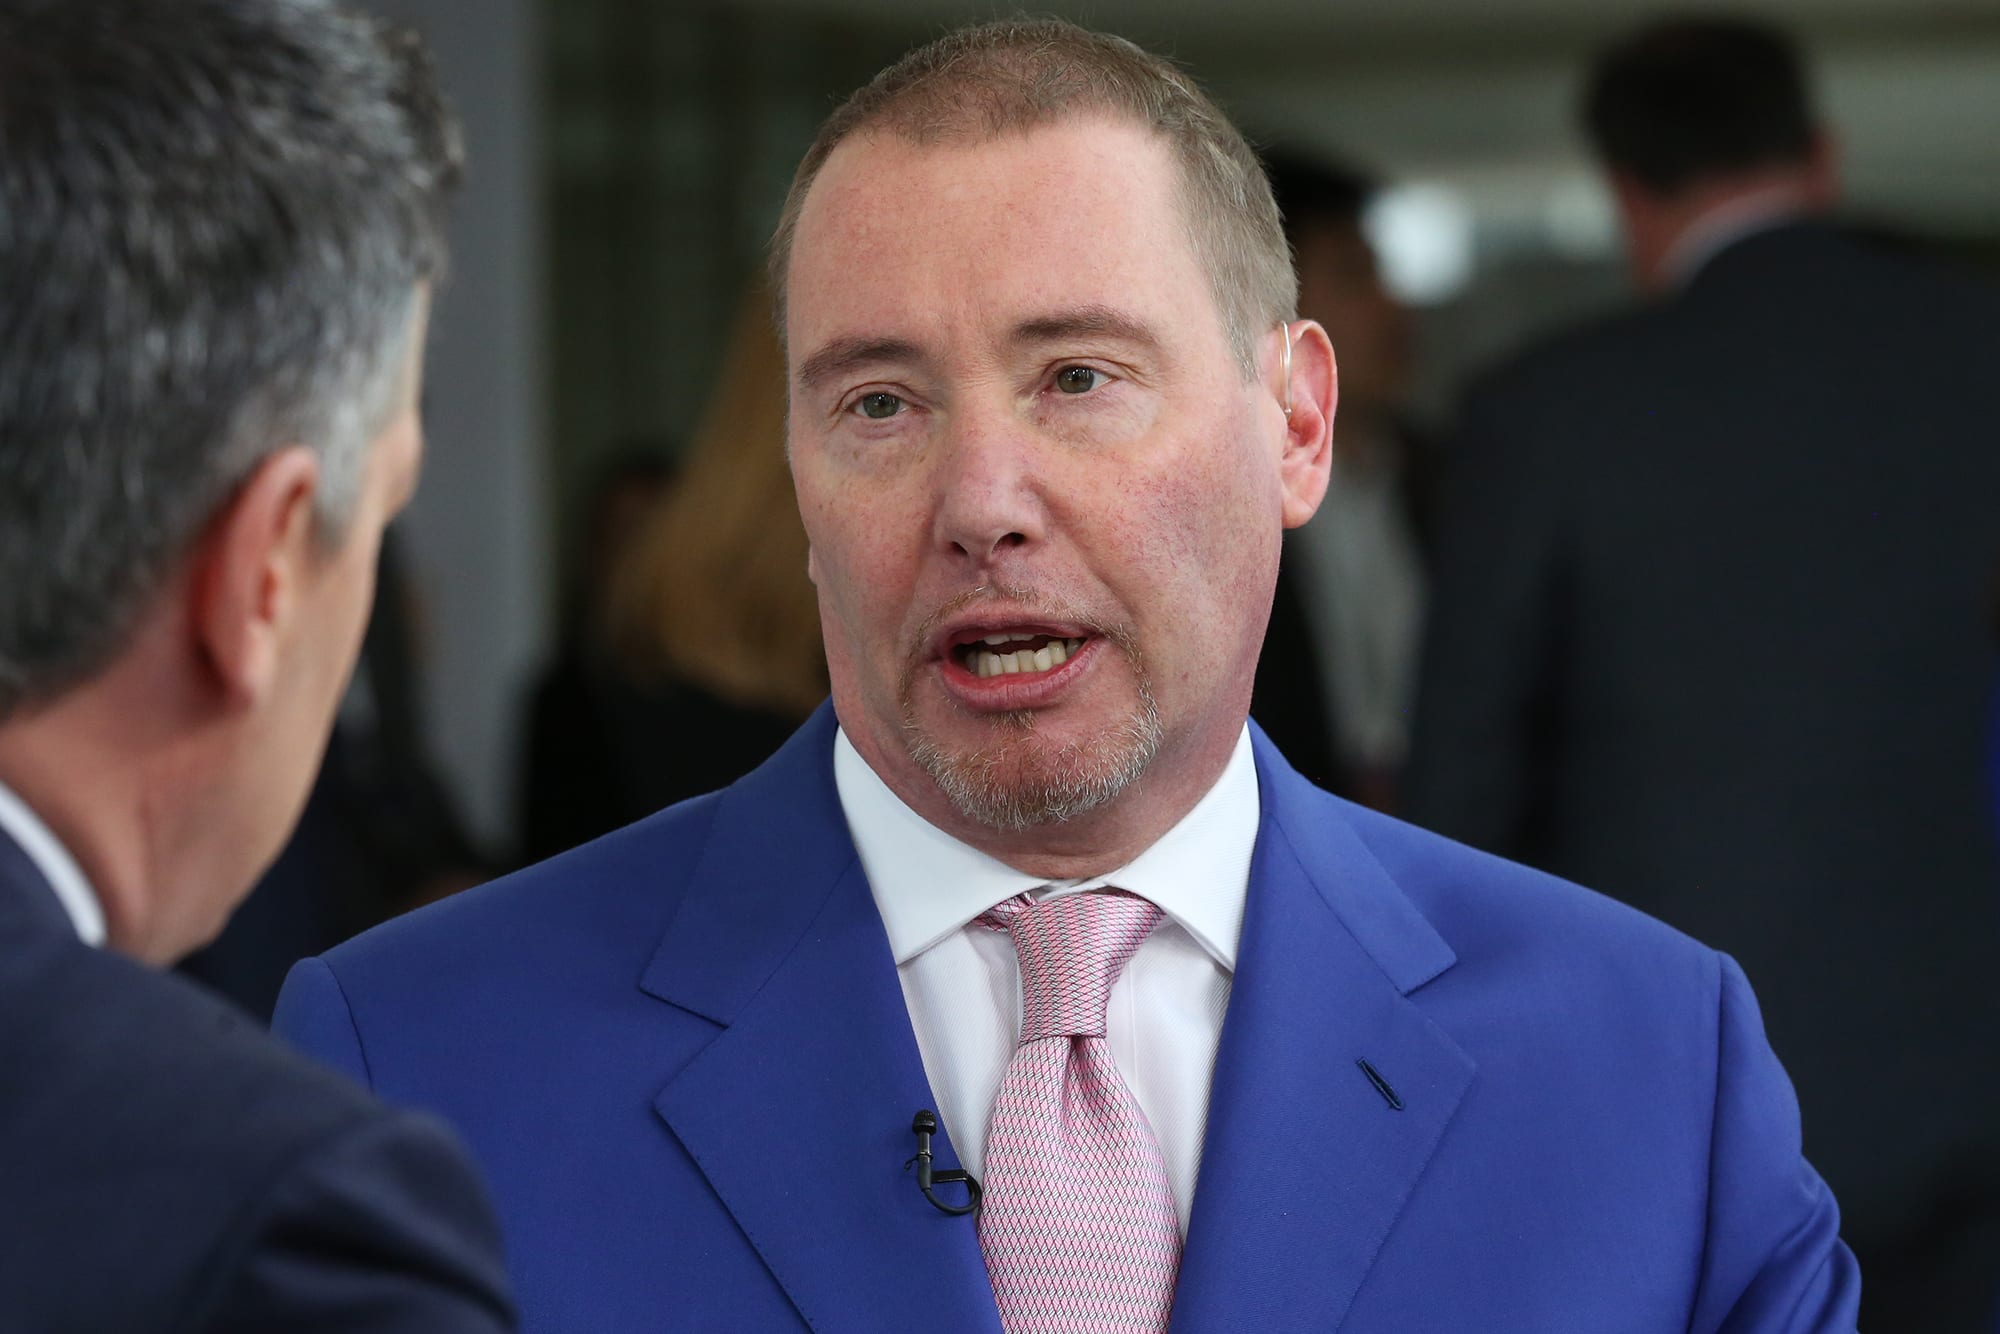 Jeff Gundlach says recession odds before the 2020 election are rising